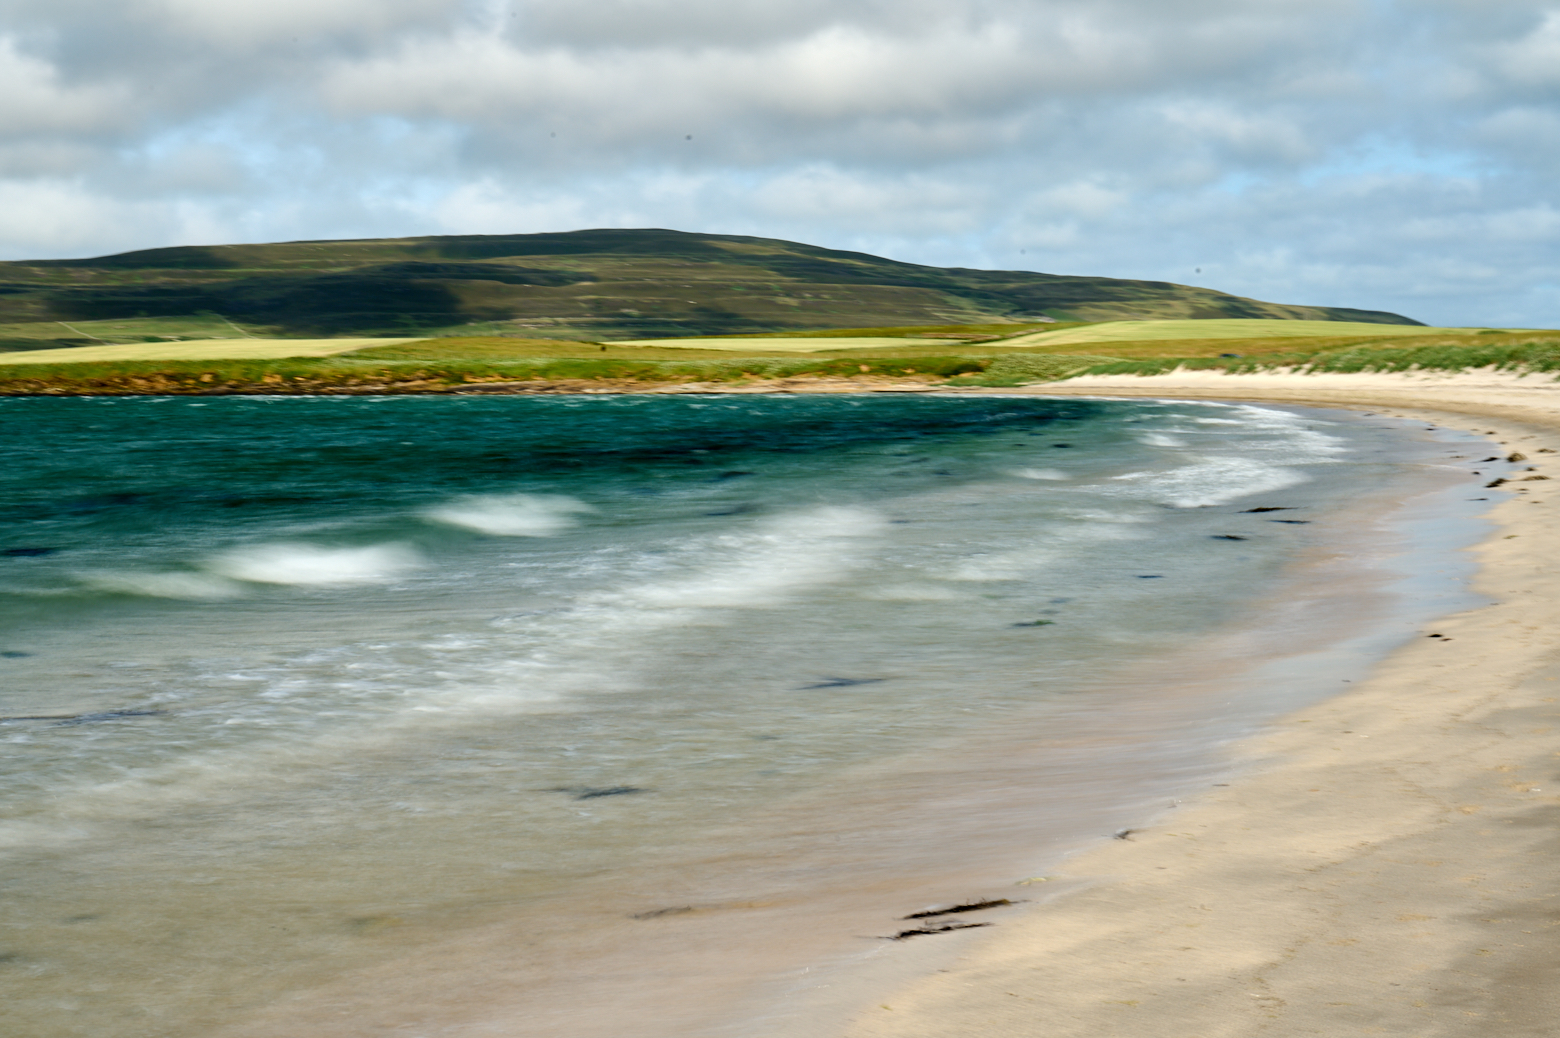 Walking along the sands of Evie in Orkney.